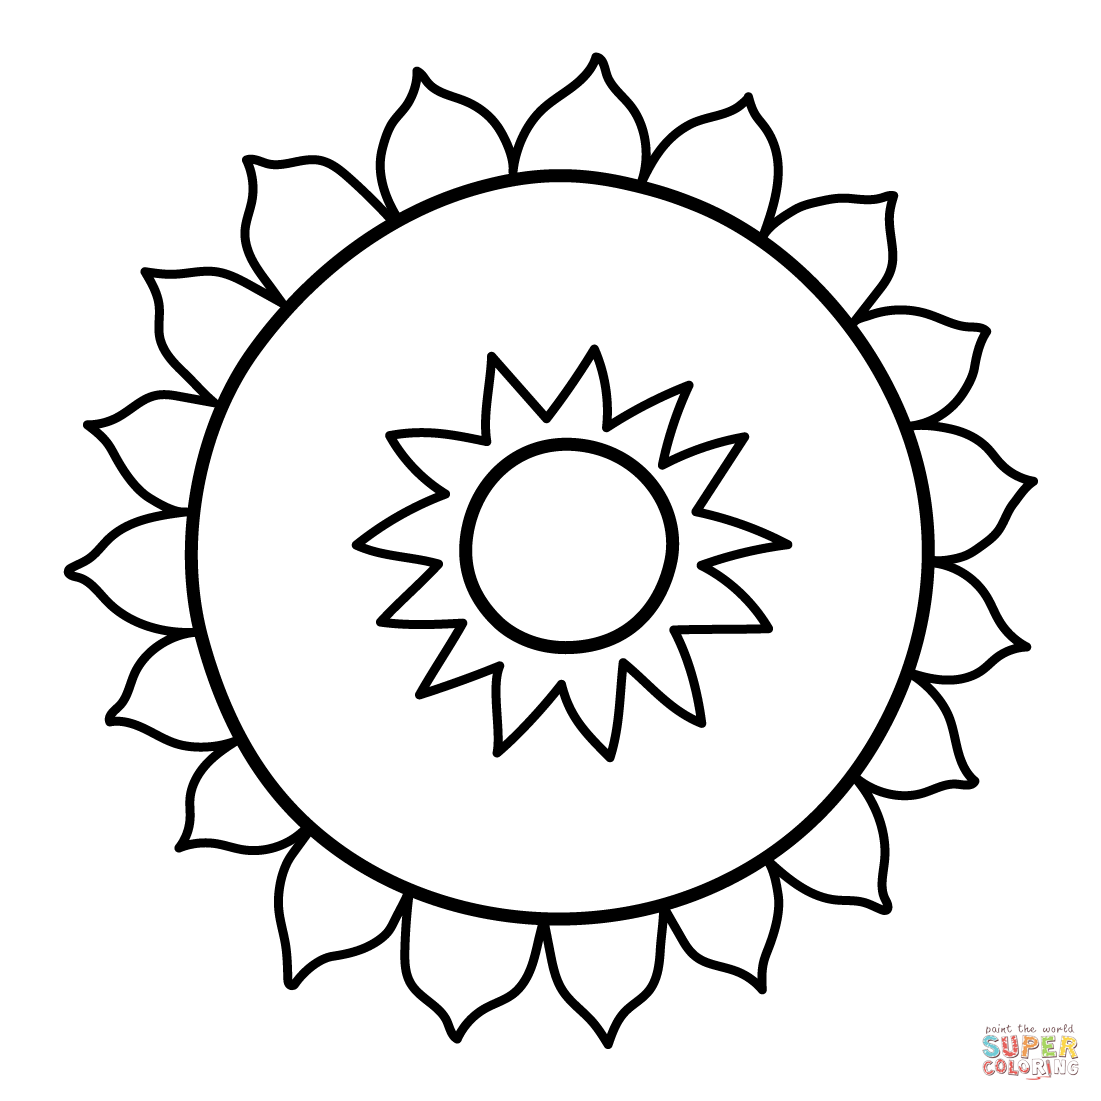 Sunflower coloring page free printable coloring pages